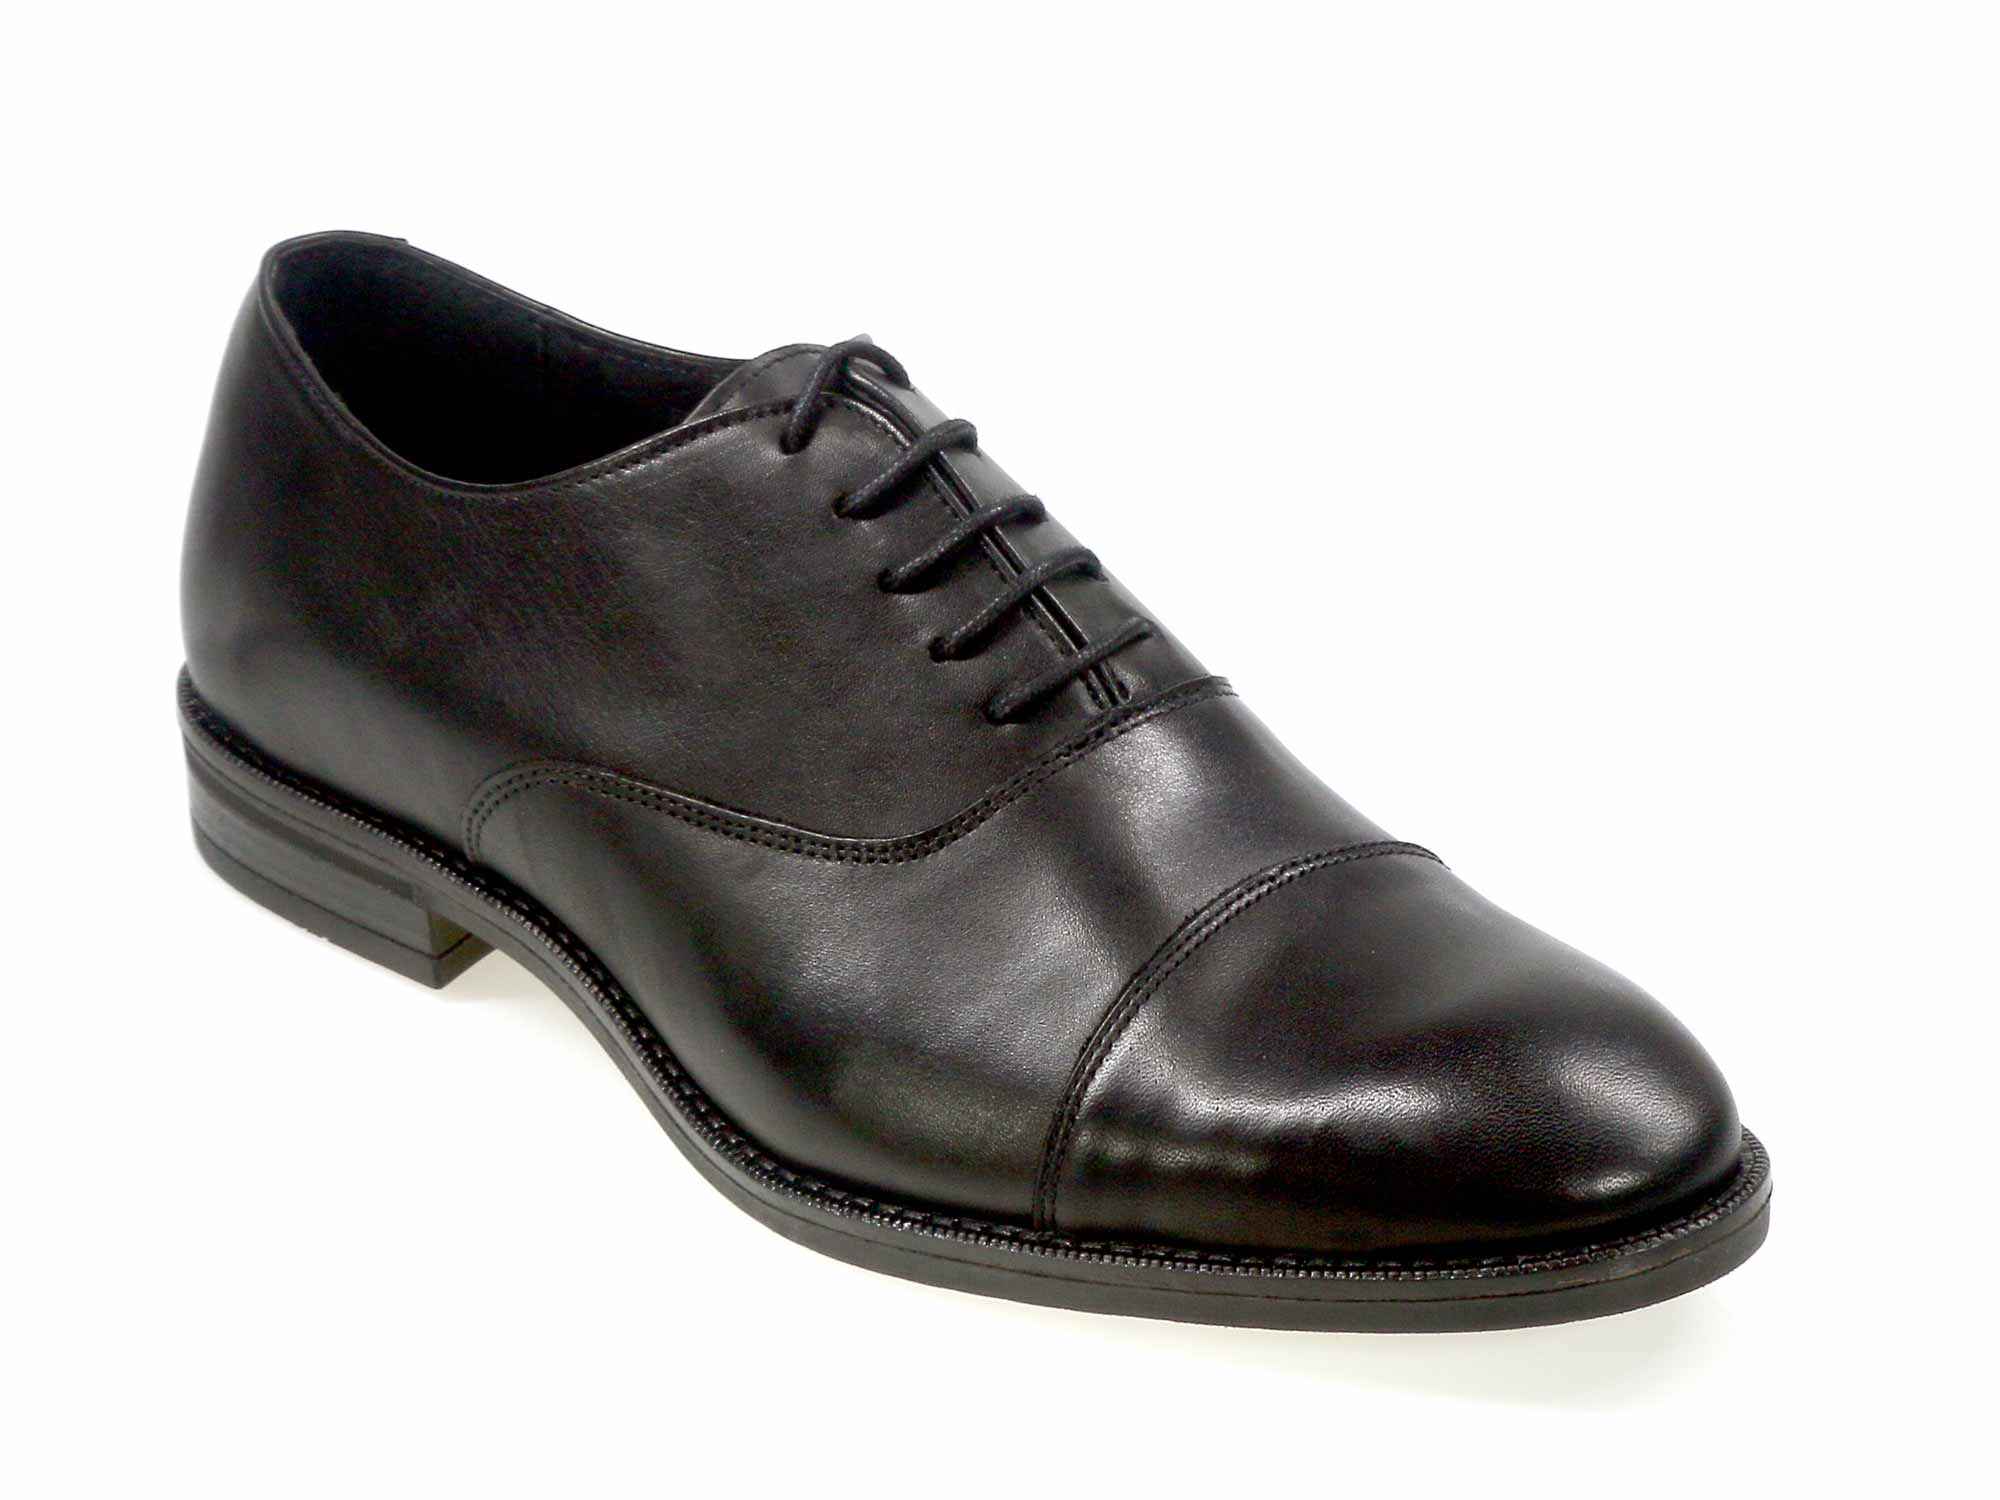 Upgrade Your Style with FALMOUTH Men's Black Calf Oxford Shoes!